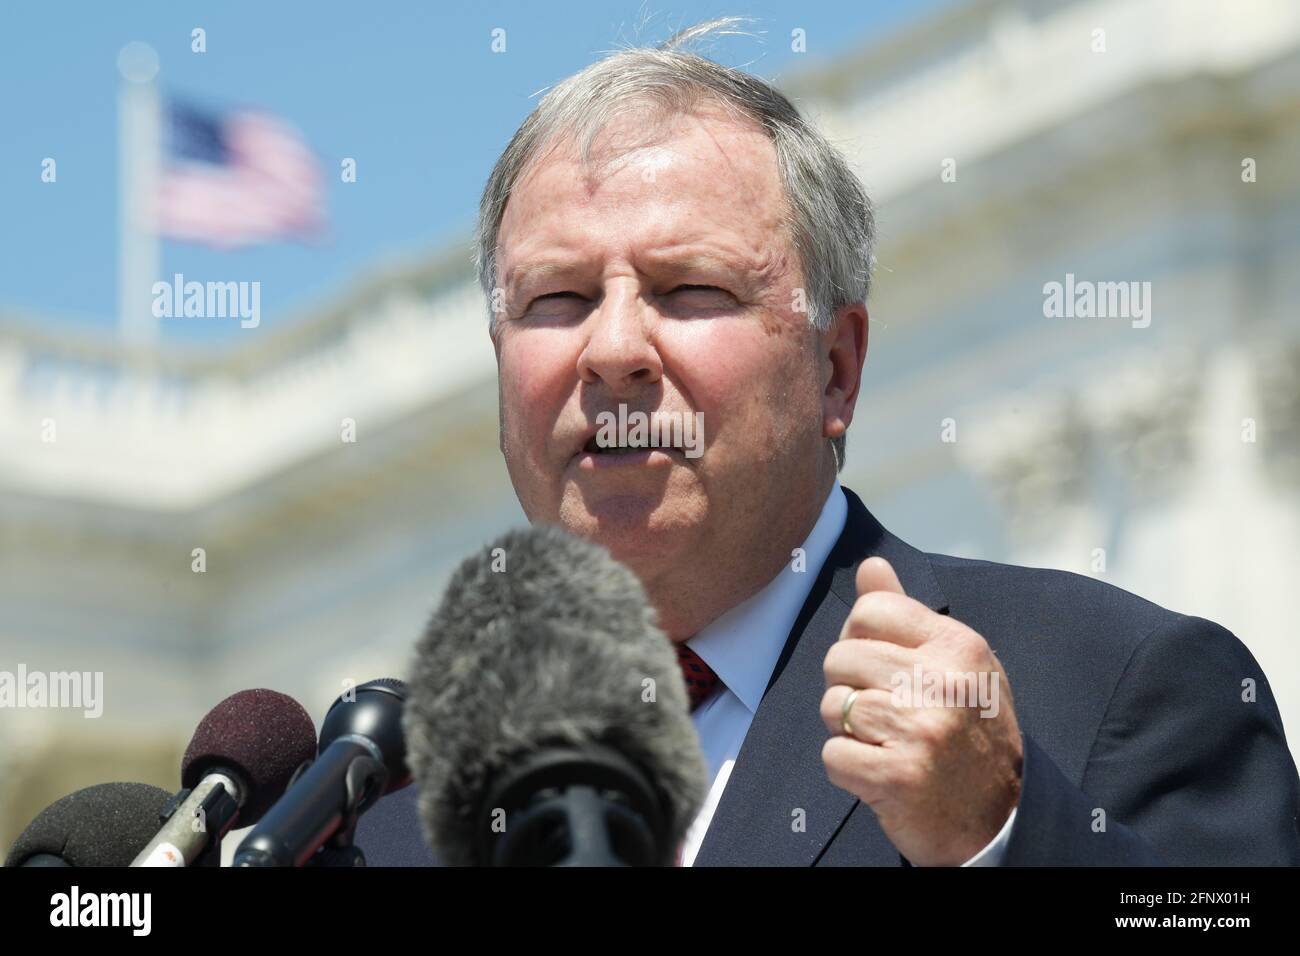 Washington, Distric of Columbia, USA. 19th May, 2021. Representative DOUG LAMBORN(R-CO) speaks during a press conference about Israel and Hamas conflict, today on May 25, 2021 at House Triangle in Washington DC, USA. Credit: Lenin Nolly/ZUMA Wire/Alamy Live News Stock Photo